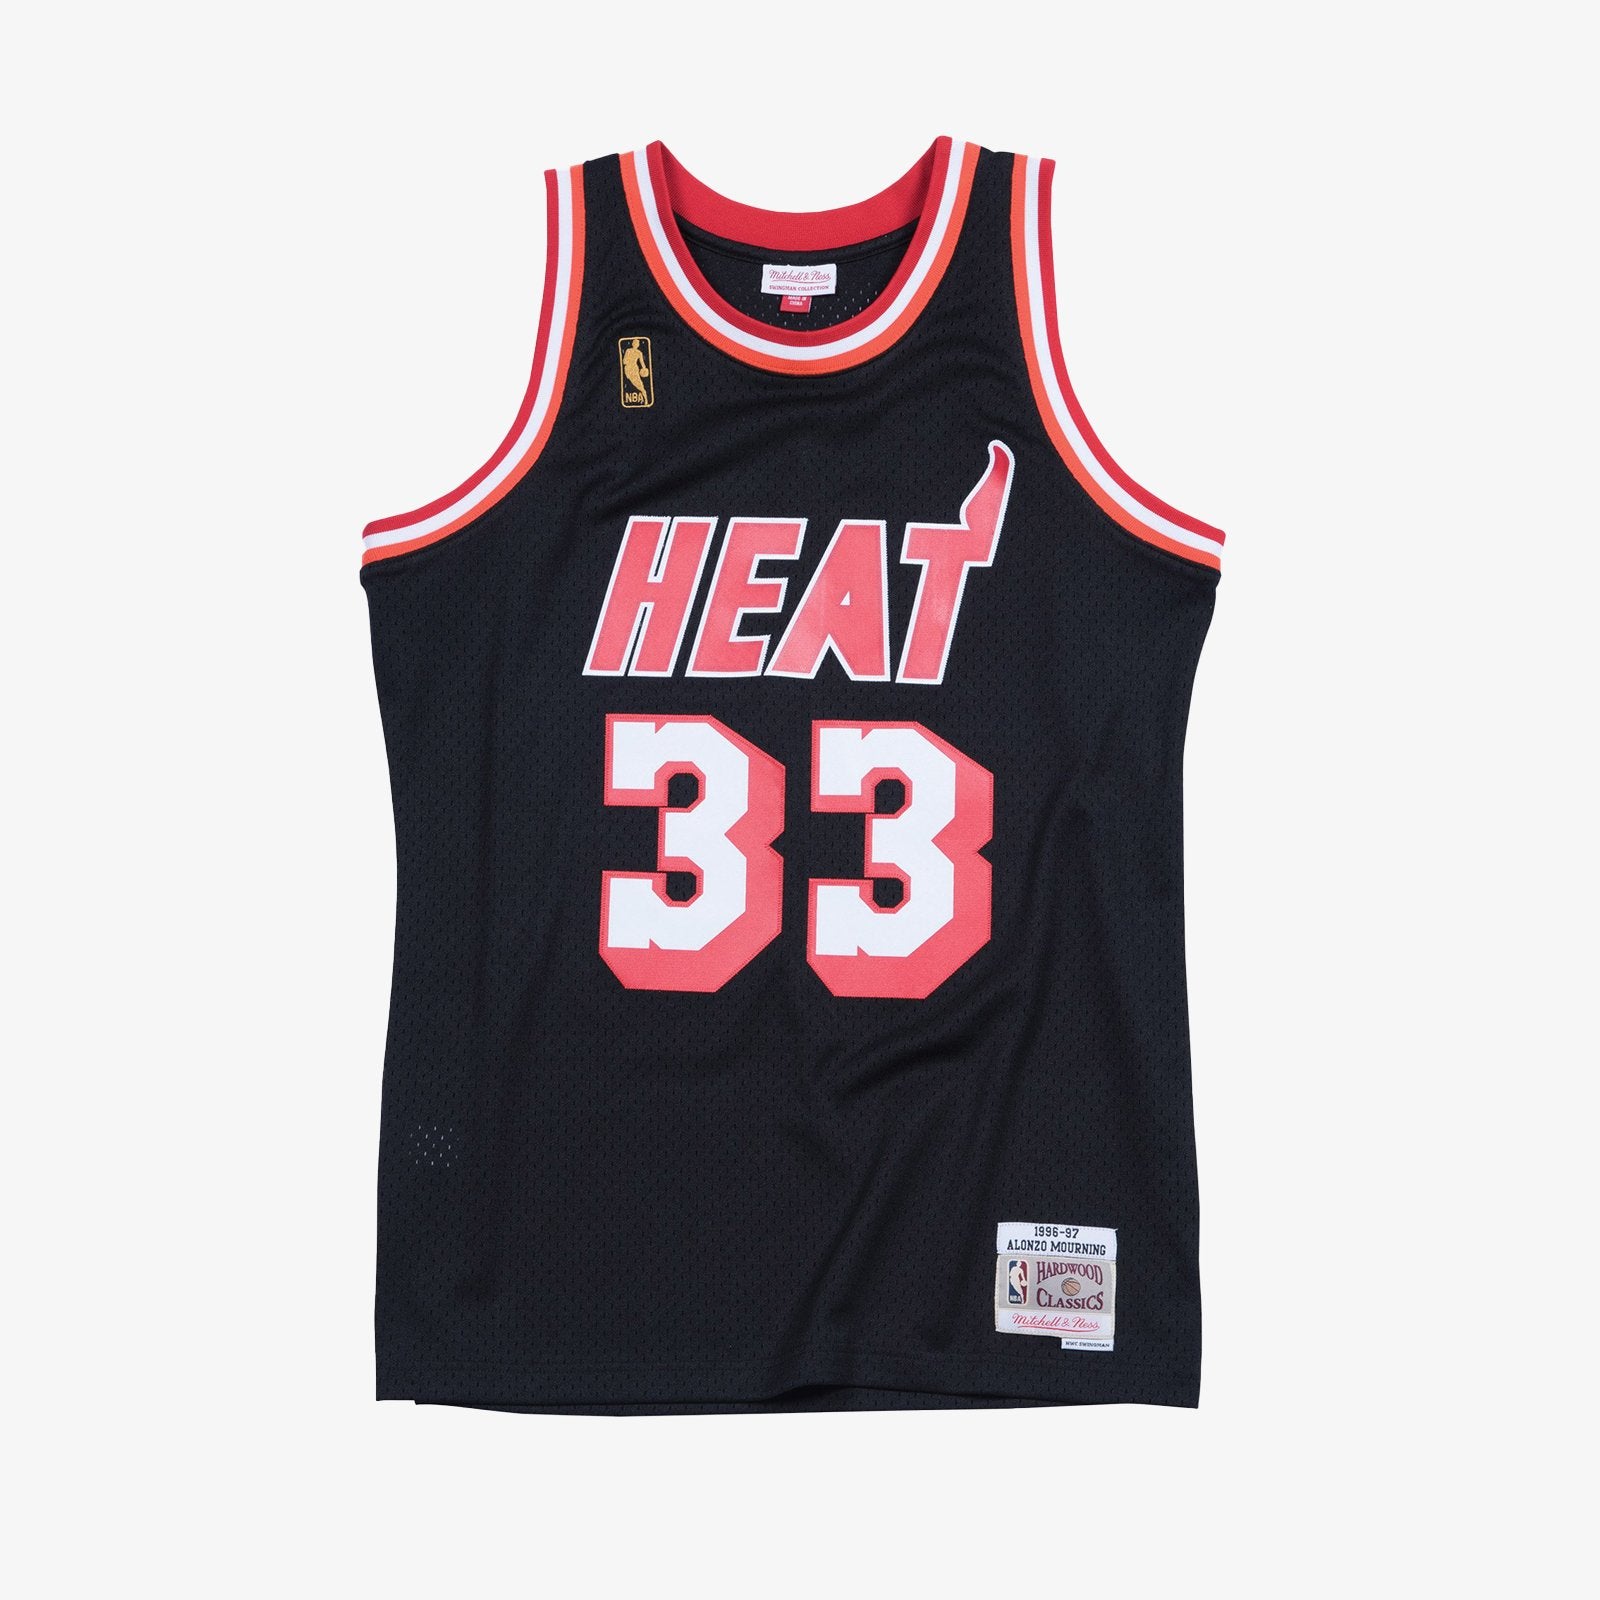 alonzo mourning jersey number